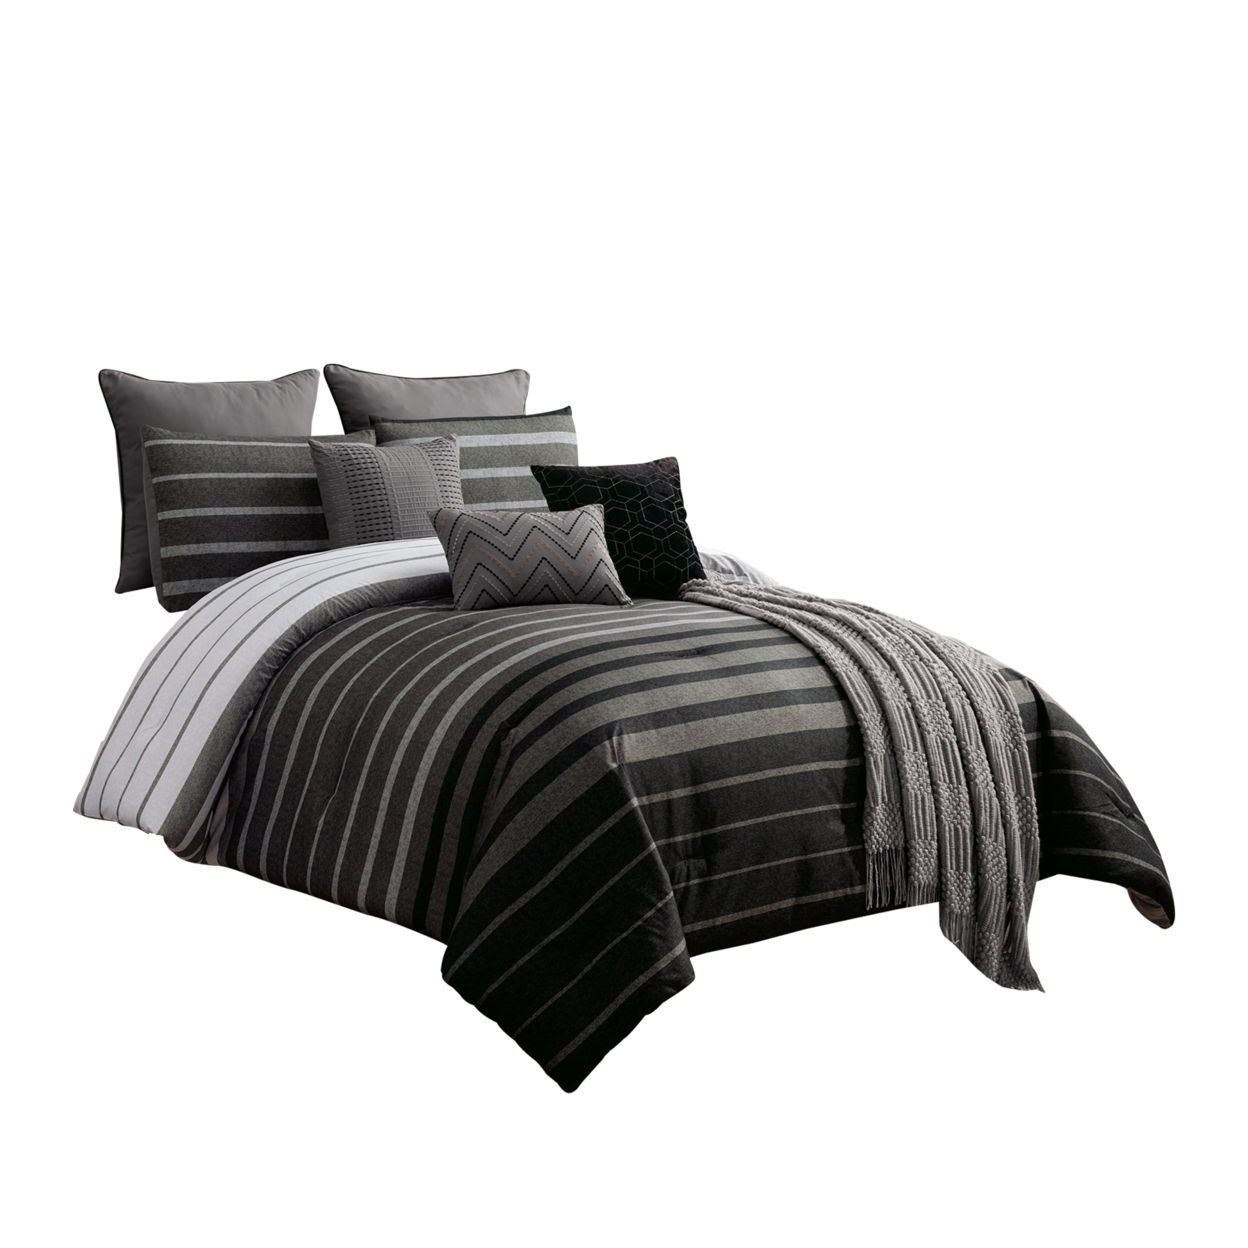 10 Piece Queen Polyester Comforter Set With Striped Details, Black And Gray- Saltoro Sherpi